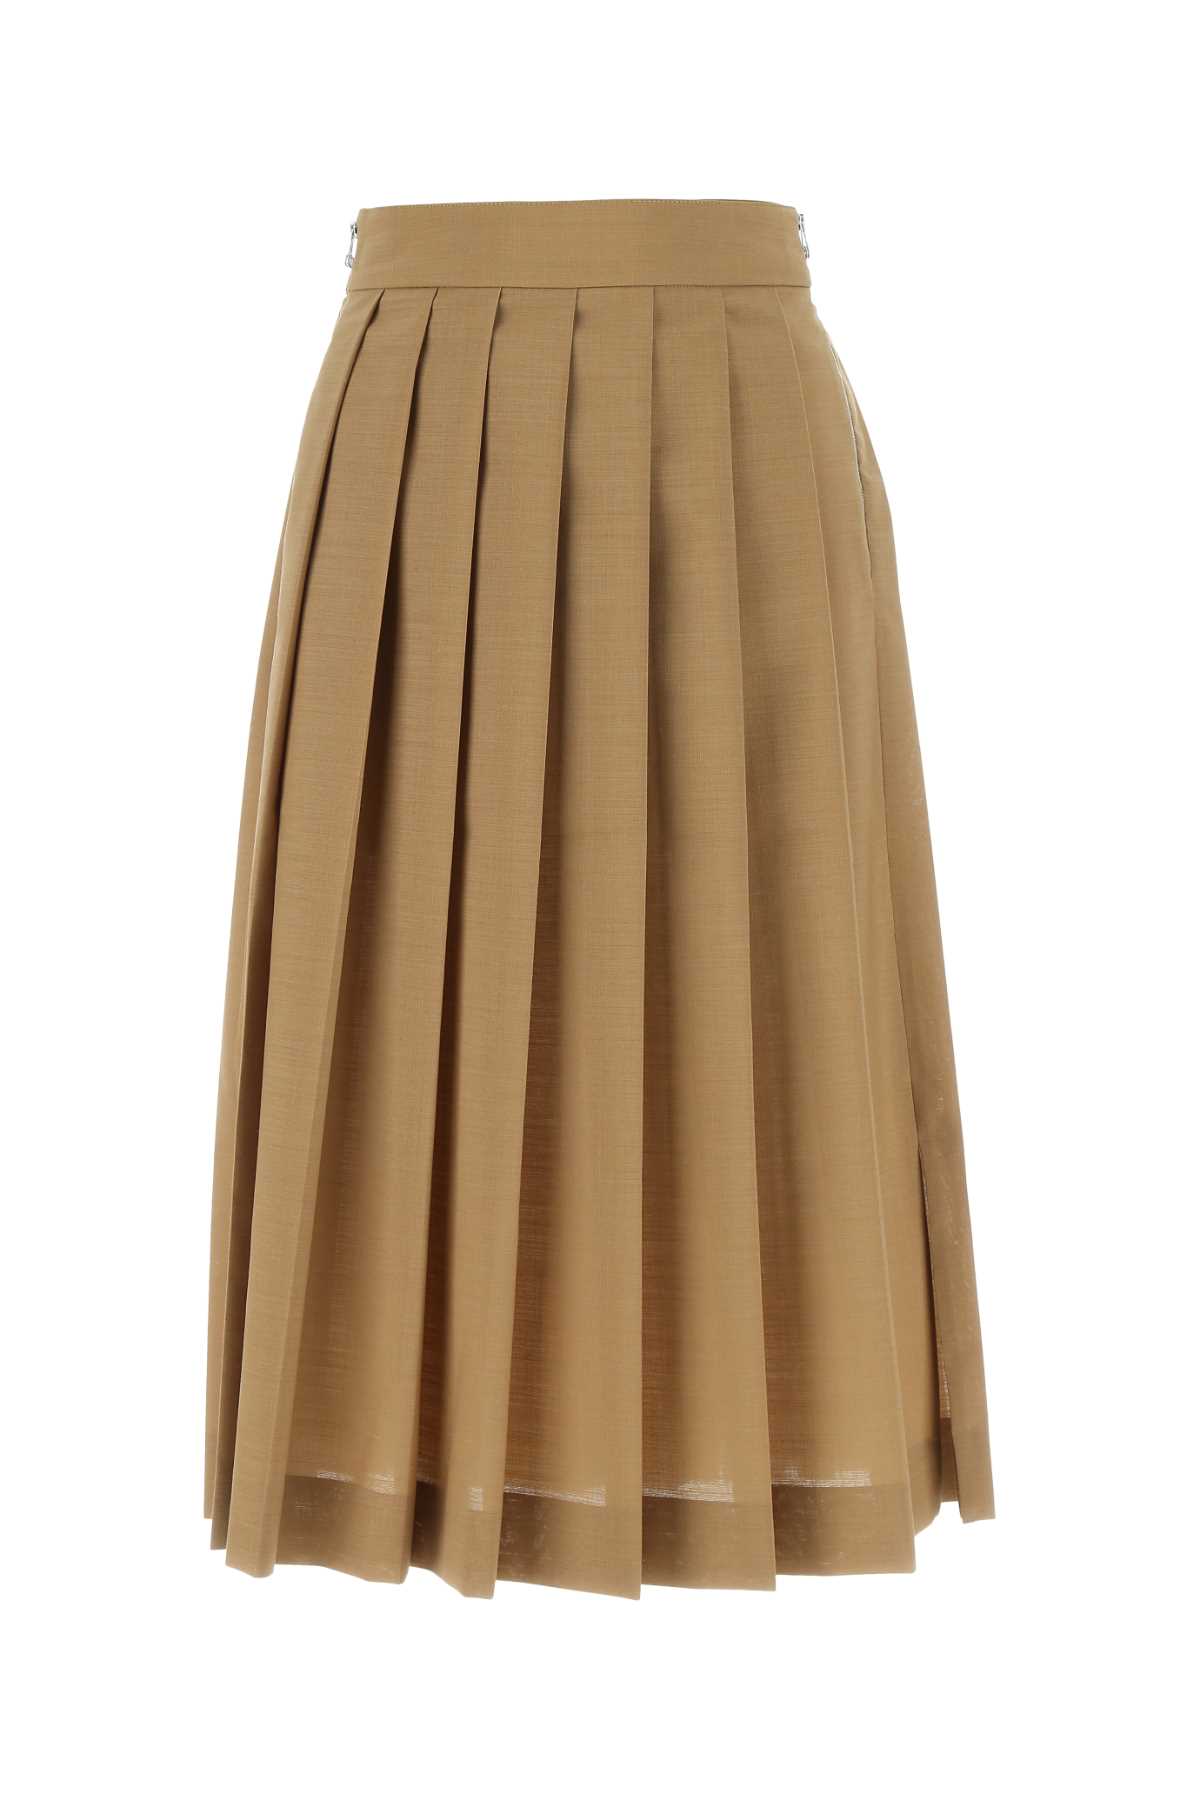 Biscuit Polyester Blend Skirt